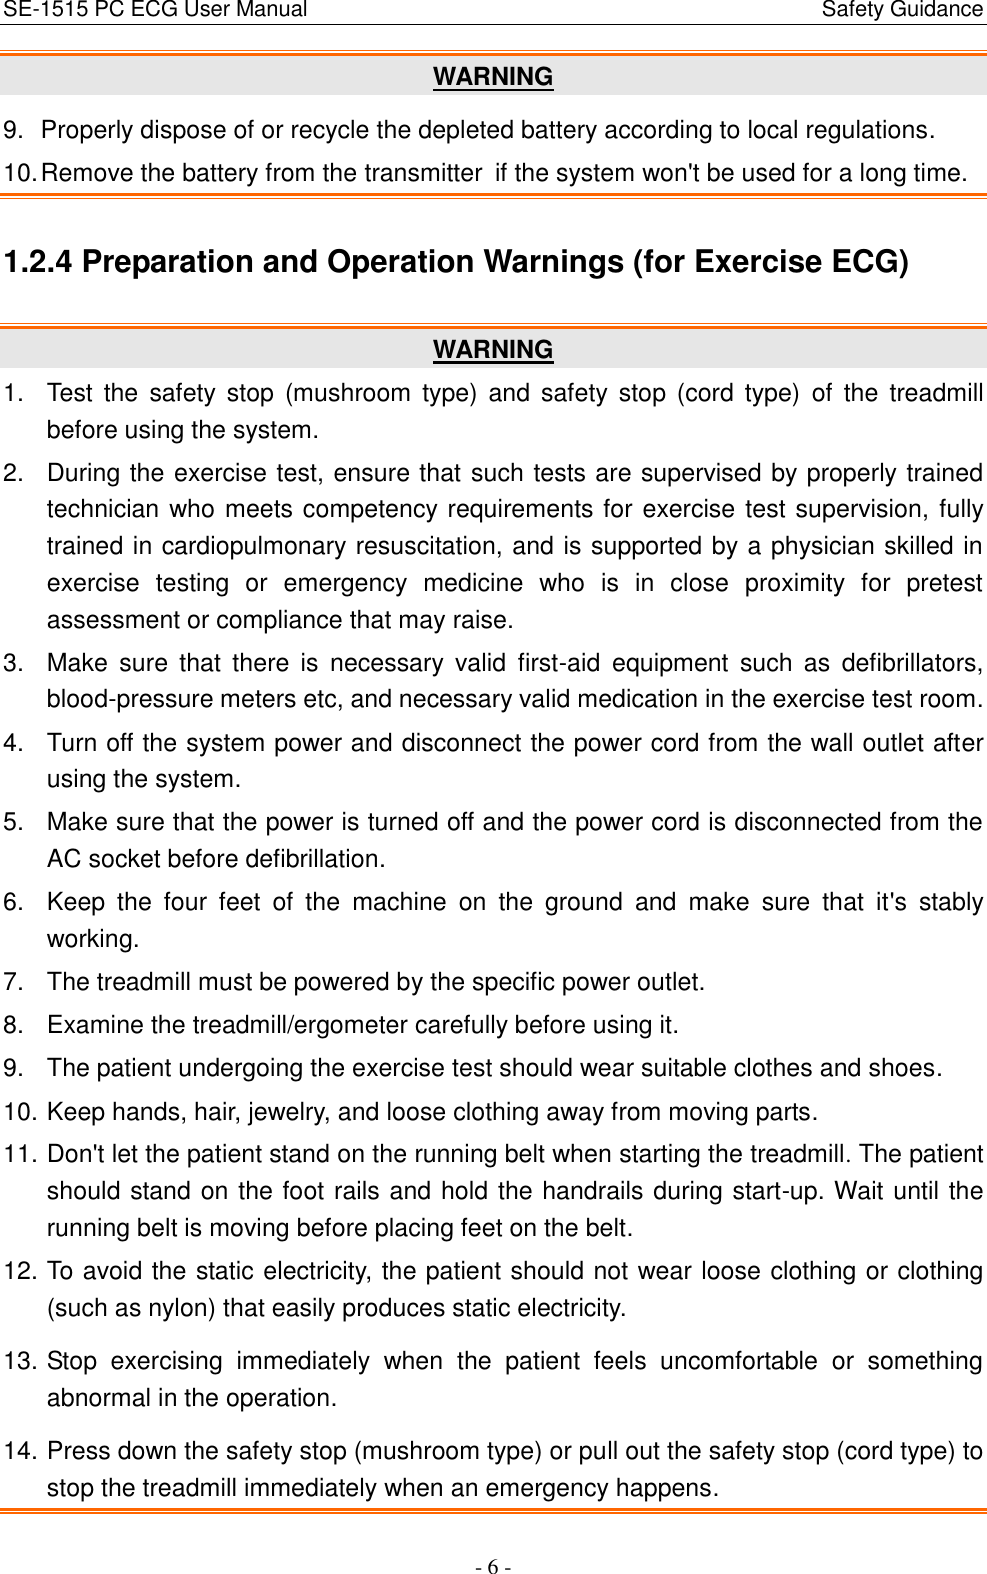 SE-1515 PC ECG User Manual                                                                                            Safety Guidance - 6 - WARNING 9.  Properly dispose of or recycle the depleted battery according to local regulations. 10. Remove the battery from the transmitter if the system won&apos;t be used for a long time. 1.2.4 Preparation and Operation Warnings (for Exercise ECG) WARNING 1.  Test  the  safety stop  (mushroom  type)  and  safety stop (cord  type)  of  the  treadmill before using the system. 2.  During the exercise test, ensure that such tests are supervised by properly trained technician who meets competency requirements for exercise test supervision, fully trained in cardiopulmonary resuscitation, and is supported by a physician skilled in exercise  testing  or  emergency  medicine  who  is  in  close  proximity  for  pretest assessment or compliance that may raise. 3.  Make  sure  that  there  is  necessary  valid  first-aid  equipment  such as  defibrillators, blood-pressure meters etc, and necessary valid medication in the exercise test room. 4.  Turn off the system power and disconnect the power cord from the wall outlet after using the system. 5.  Make sure that the power is turned off and the power cord is disconnected from the AC socket before defibrillation. 6.  Keep  the  four  feet  of  the  machine  on  the  ground  and  make  sure  that  it&apos;s  stably working. 7.  The treadmill must be powered by the specific power outlet. 8.  Examine the treadmill/ergometer carefully before using it. 9.  The patient undergoing the exercise test should wear suitable clothes and shoes. 10. Keep hands, hair, jewelry, and loose clothing away from moving parts. 11. Don&apos;t let the patient stand on the running belt when starting the treadmill. The patient should stand on the foot rails and hold the handrails during start-up. Wait until the running belt is moving before placing feet on the belt. 12. To avoid the static electricity, the patient should not wear loose clothing or clothing (such as nylon) that easily produces static electricity. 13. Stop  exercising  immediately  when  the  patient  feels  uncomfortable  or  something abnormal in the operation. 14. Press down the safety stop (mushroom type) or pull out the safety stop (cord type) to stop the treadmill immediately when an emergency happens. 